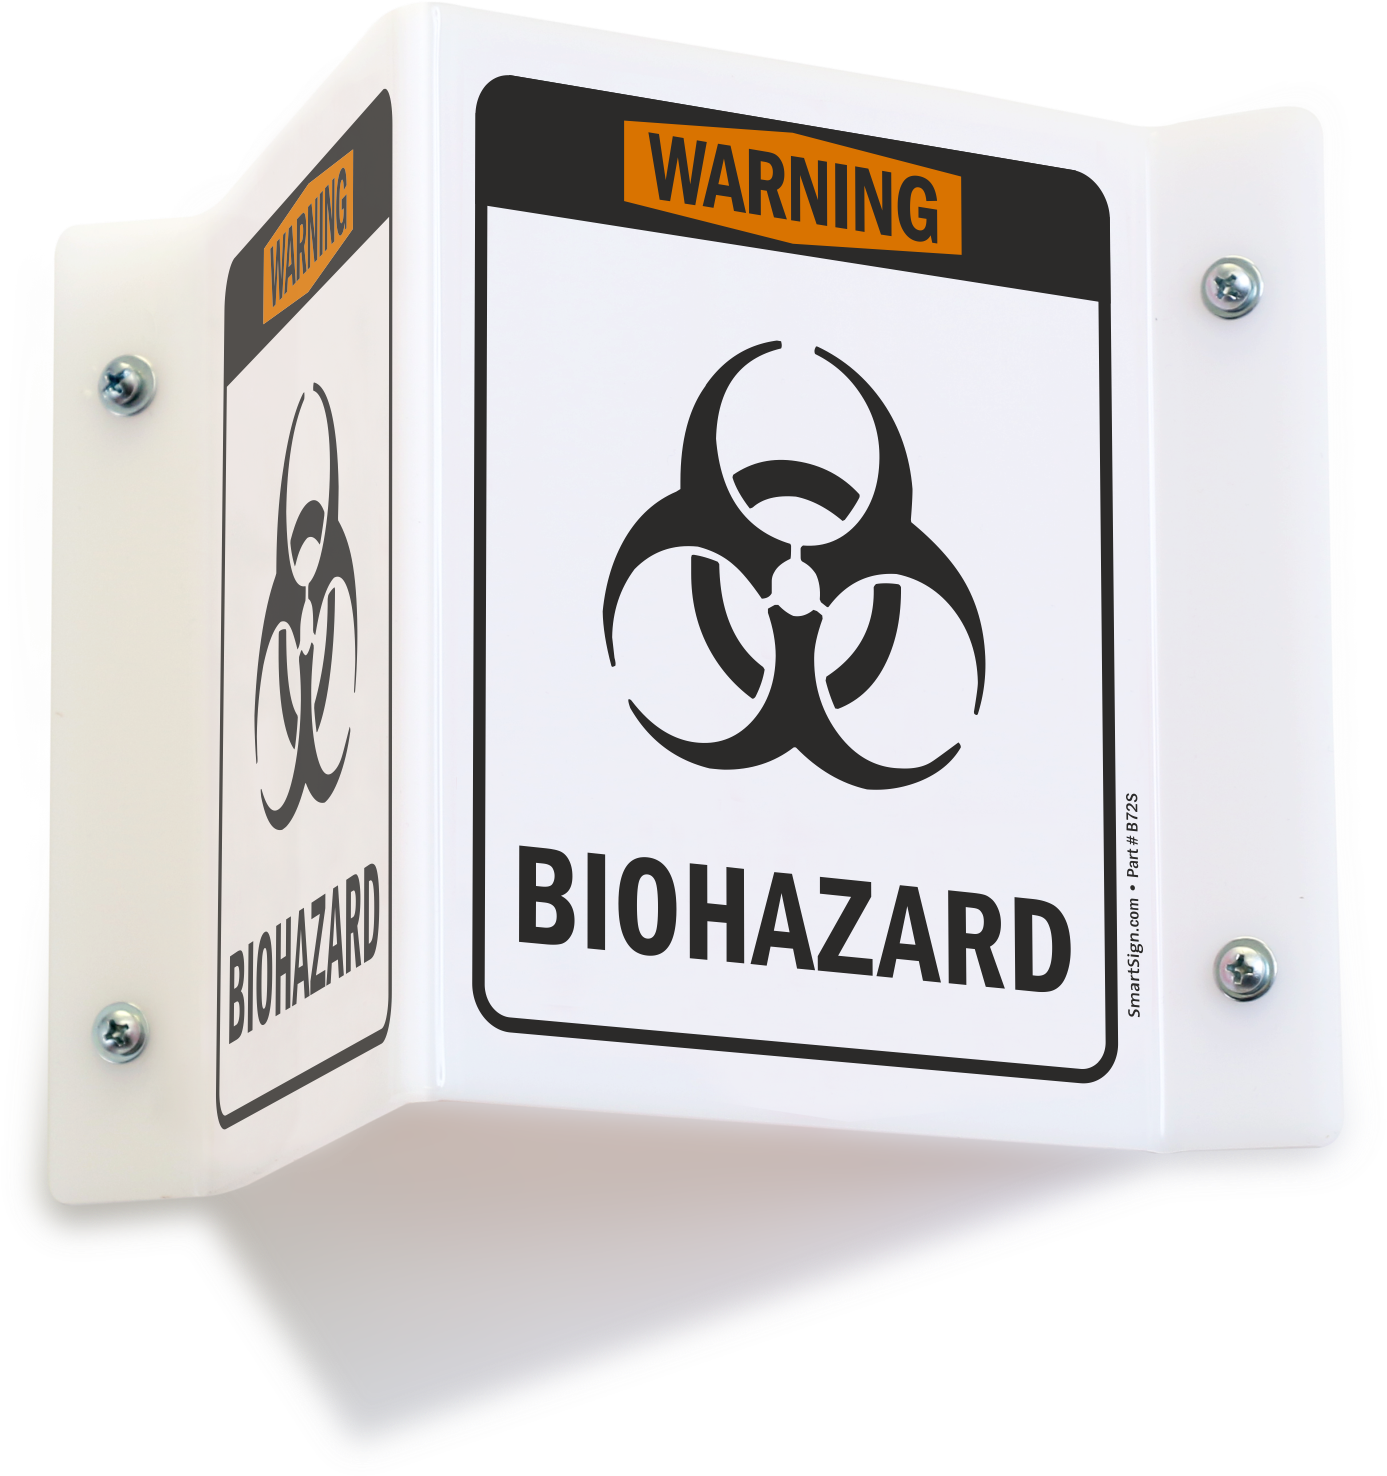 Biohazard Warning Sign3 D View PNG